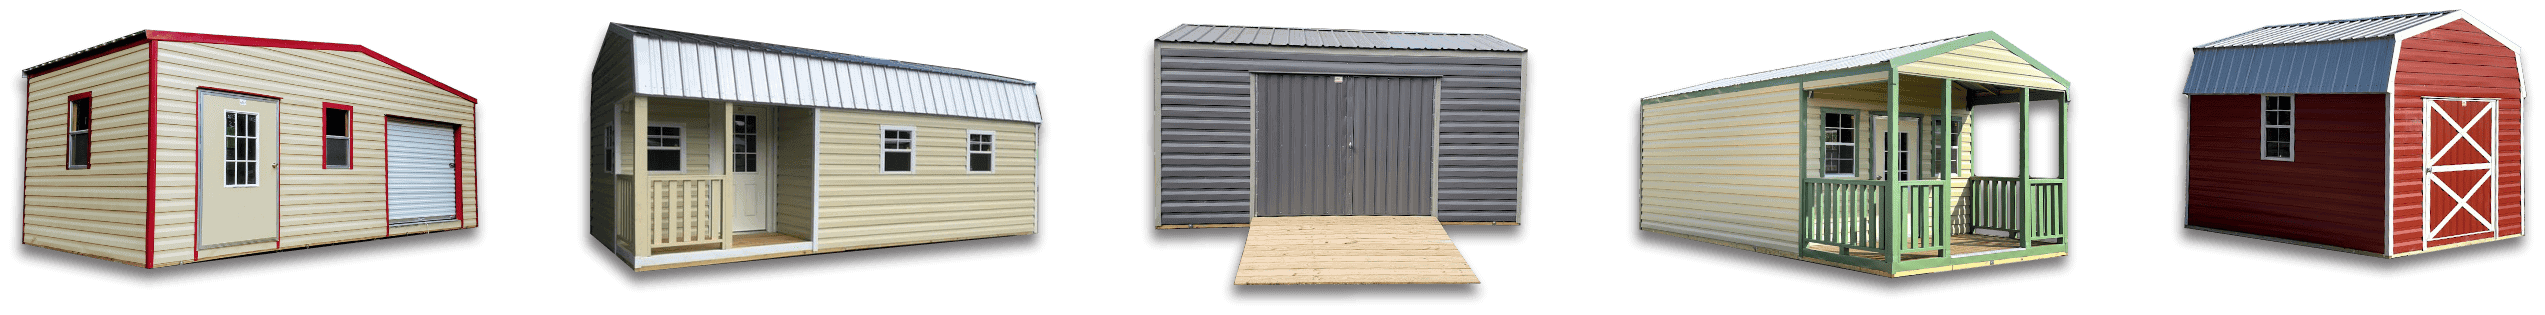 Shop our selection of 14x30 sheds for sale - portable buildings, storage sheds, and outdoor storage buildings. As a trusted shed dealer, Robin Sheds offers a variety of shed styles to meet your needs. Browse our 14x30 options today